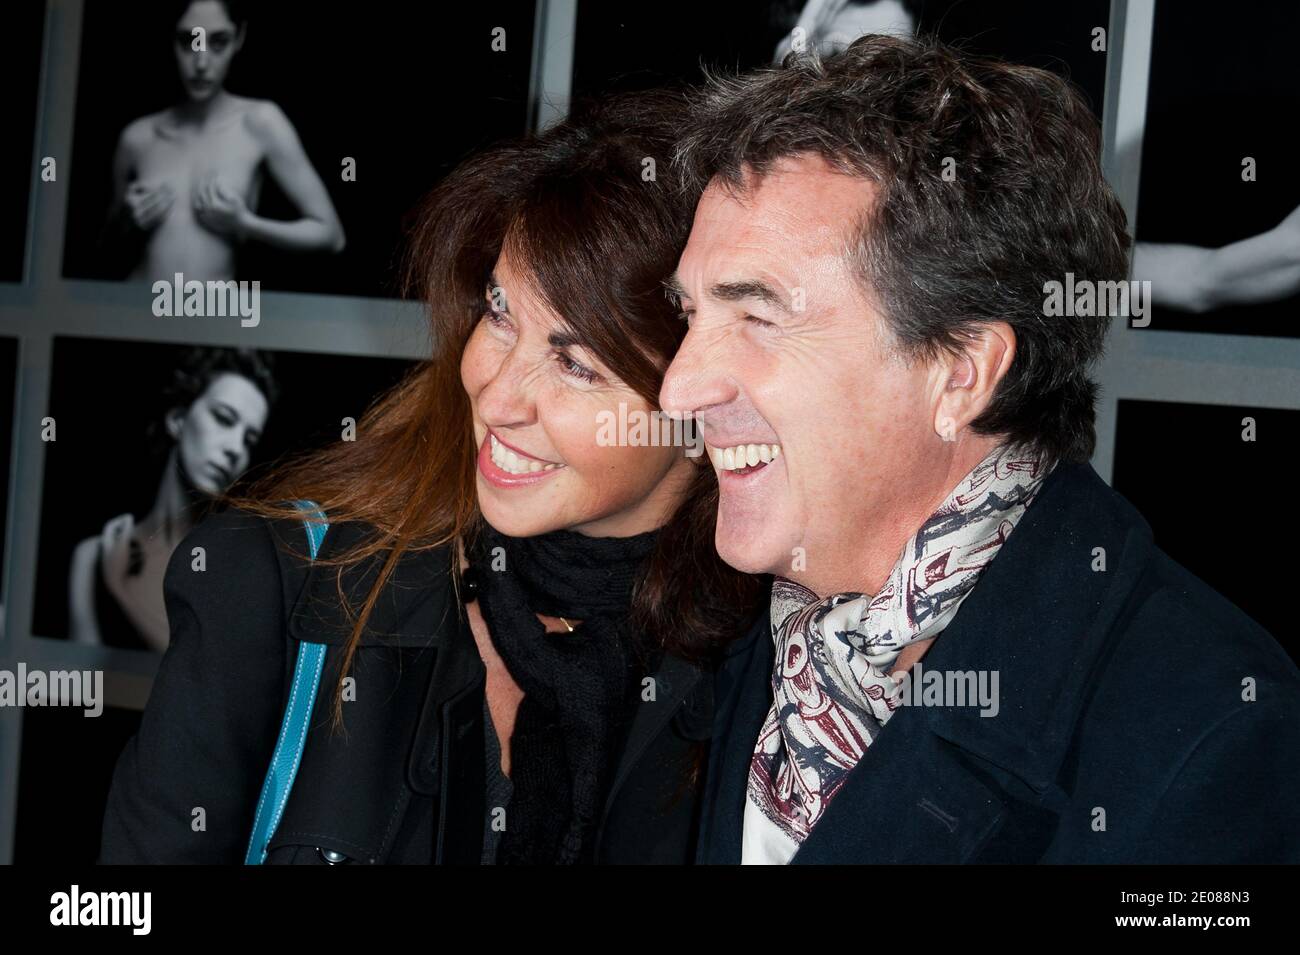 Francois Cluzet and Narjiss Cluzet attending the photocall for the Cesar's 2012 Revelations held at Chaumet, place vendome, in Paris, France on January 16, 2012. Photo by Nicolas Genin/ABACAPRESS.COM Stock Photo